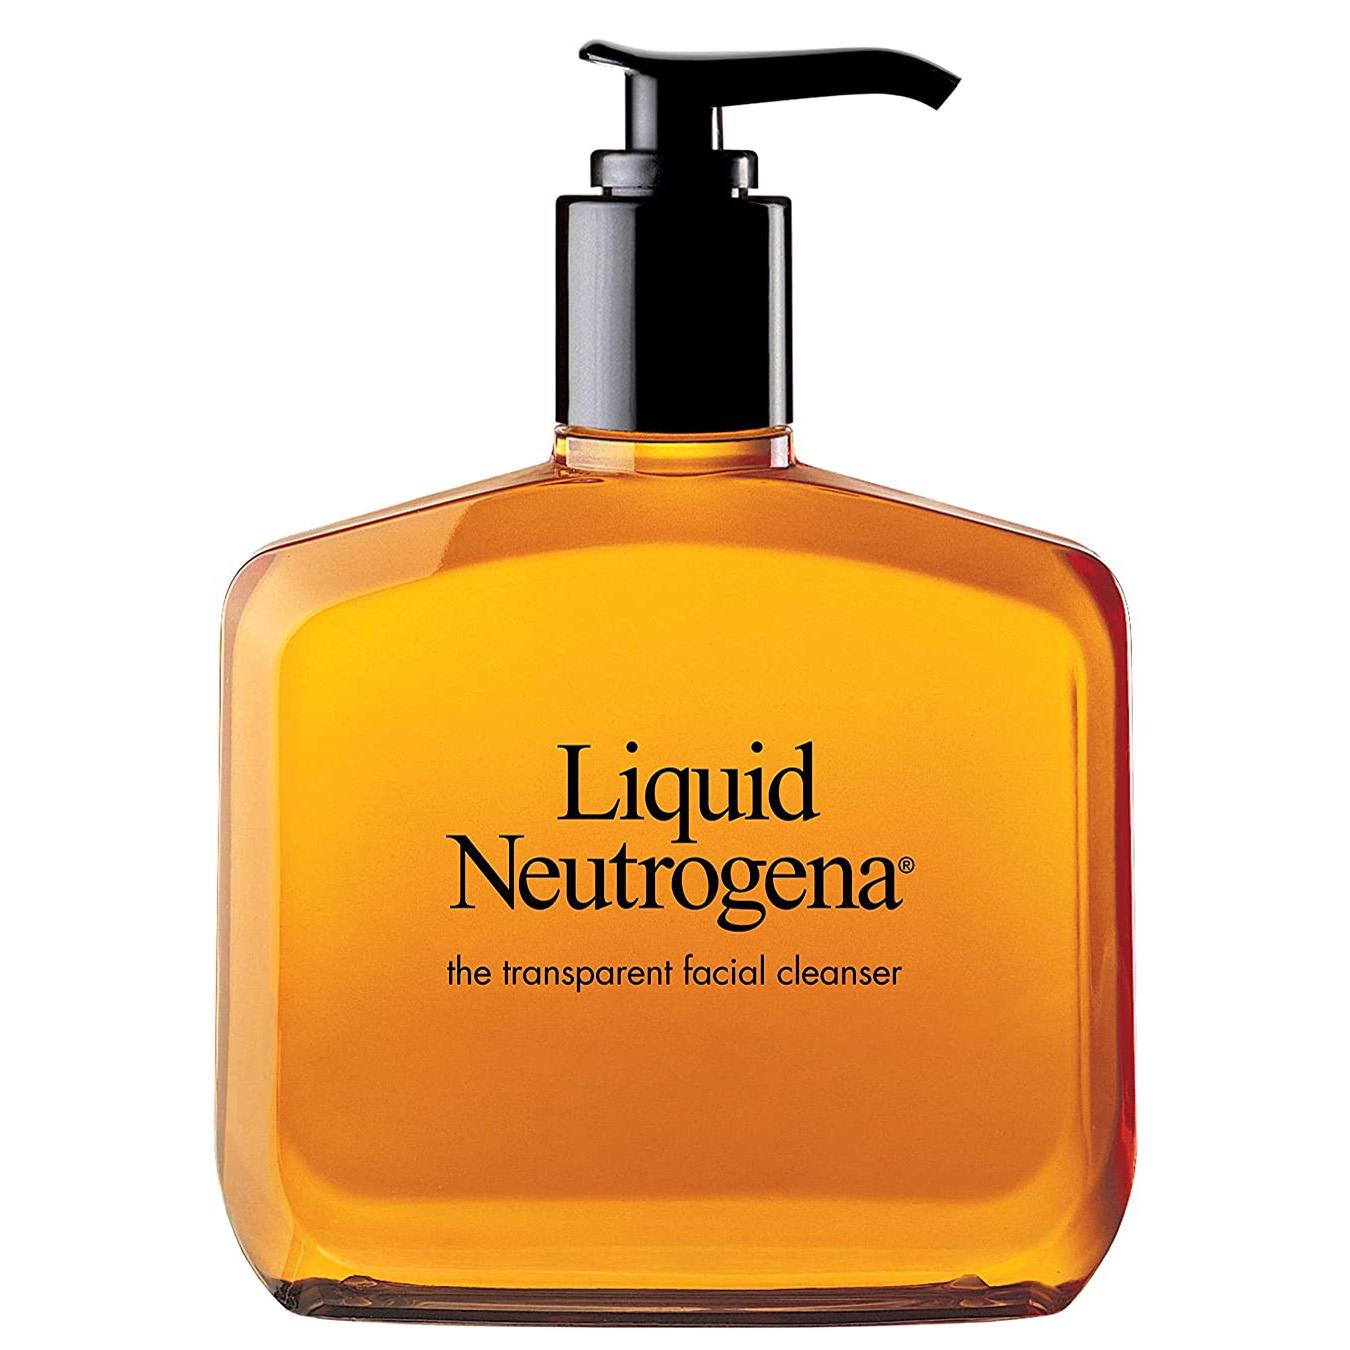 Neutrogena Liquid Gentle Facial Cleanser for $5.23 Shipped